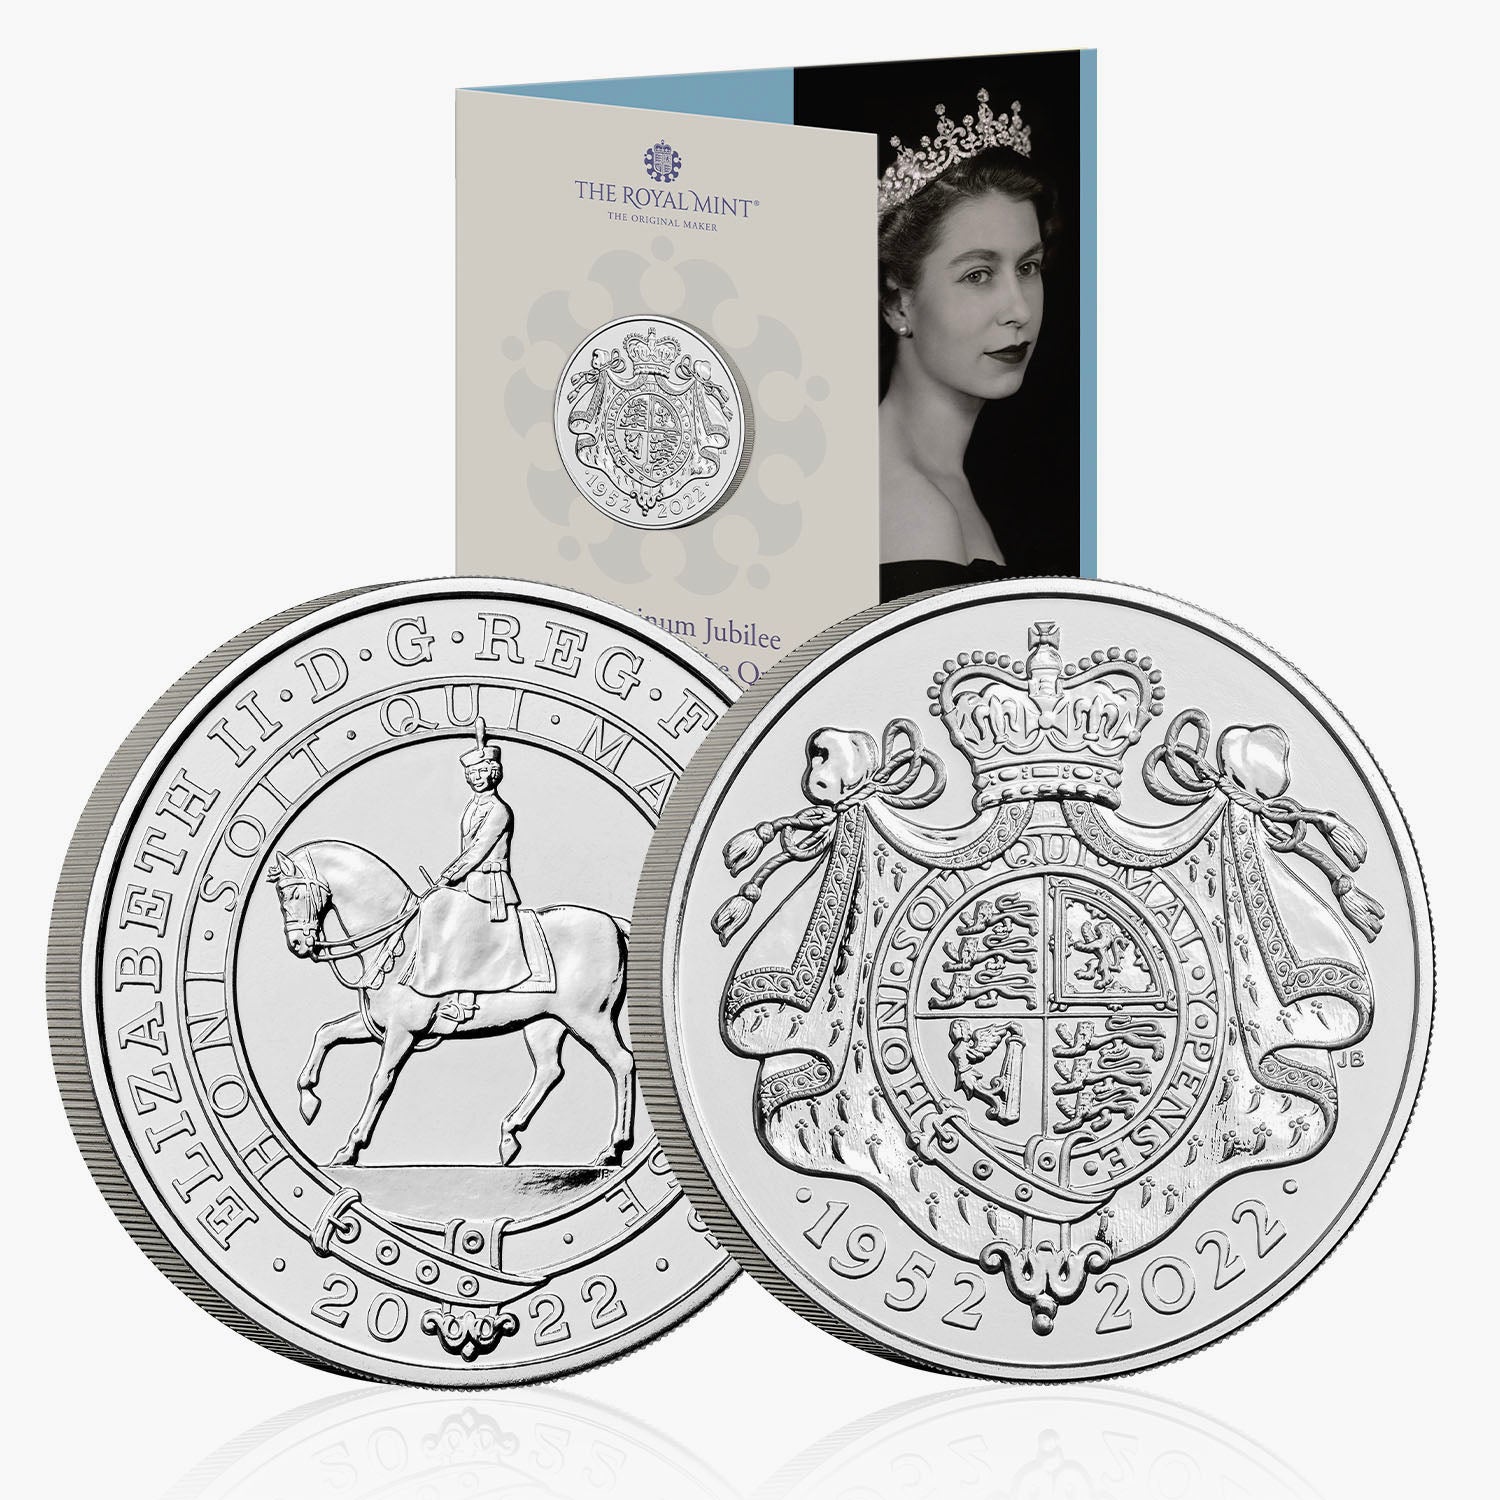 The Platinum Jubilee of Her Majesty The Queen 2022 UK £5 Brilliant Uncirculated Coin